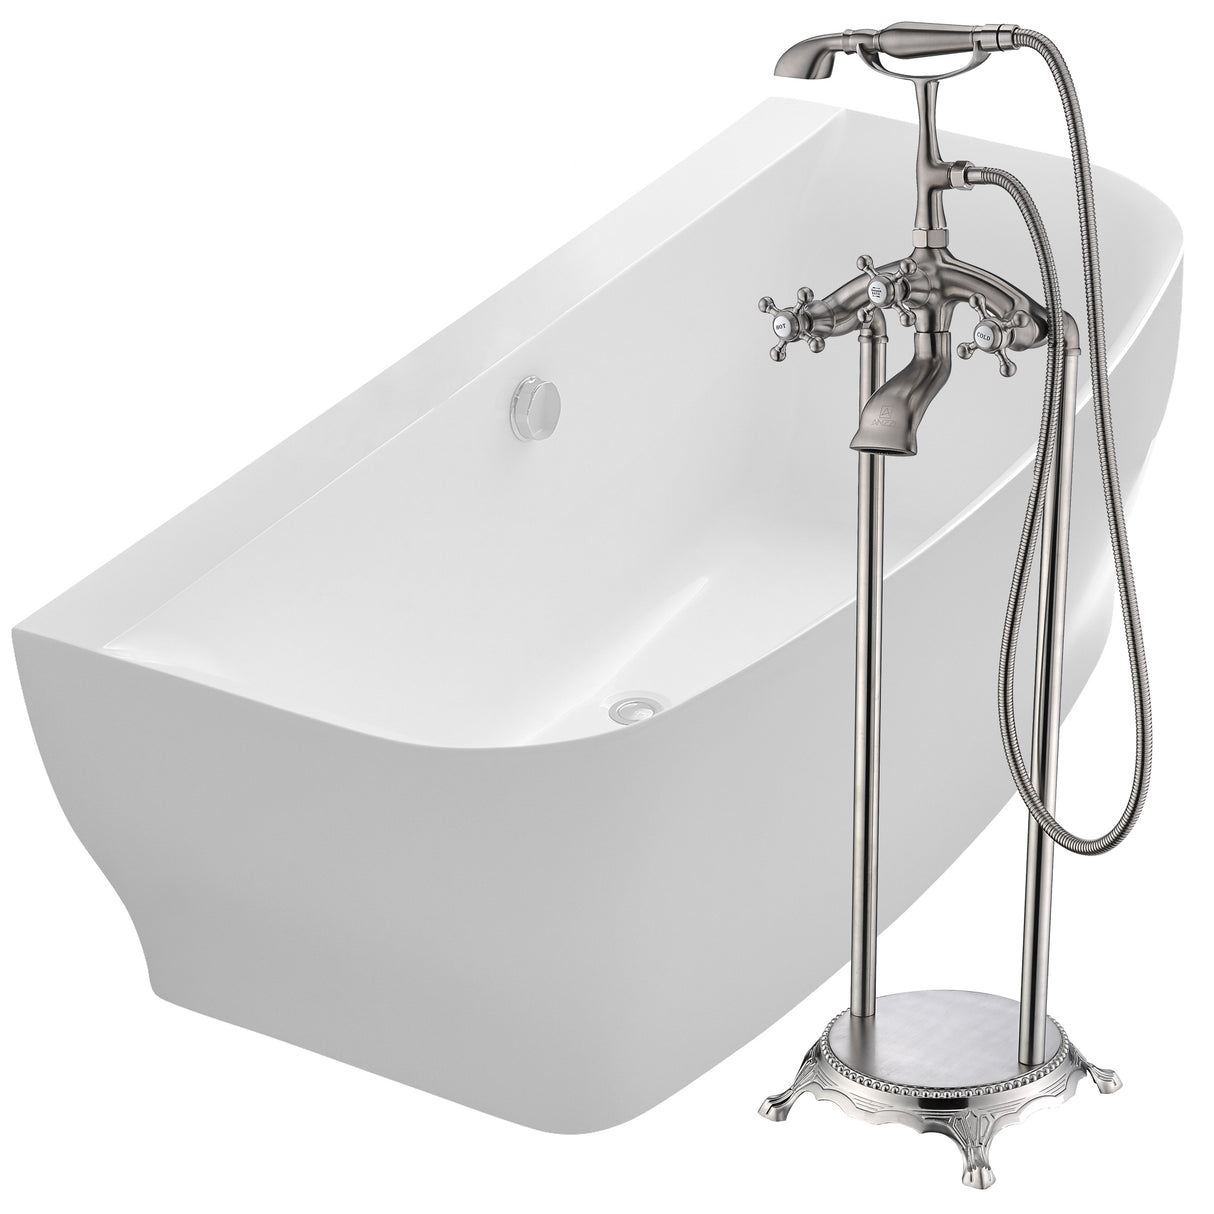 ANZZI FTAZ112-0052B Bank 64.9 in. Acrylic Flatbottom Bathtub in White with Tugela Faucet in Brushed Nickel